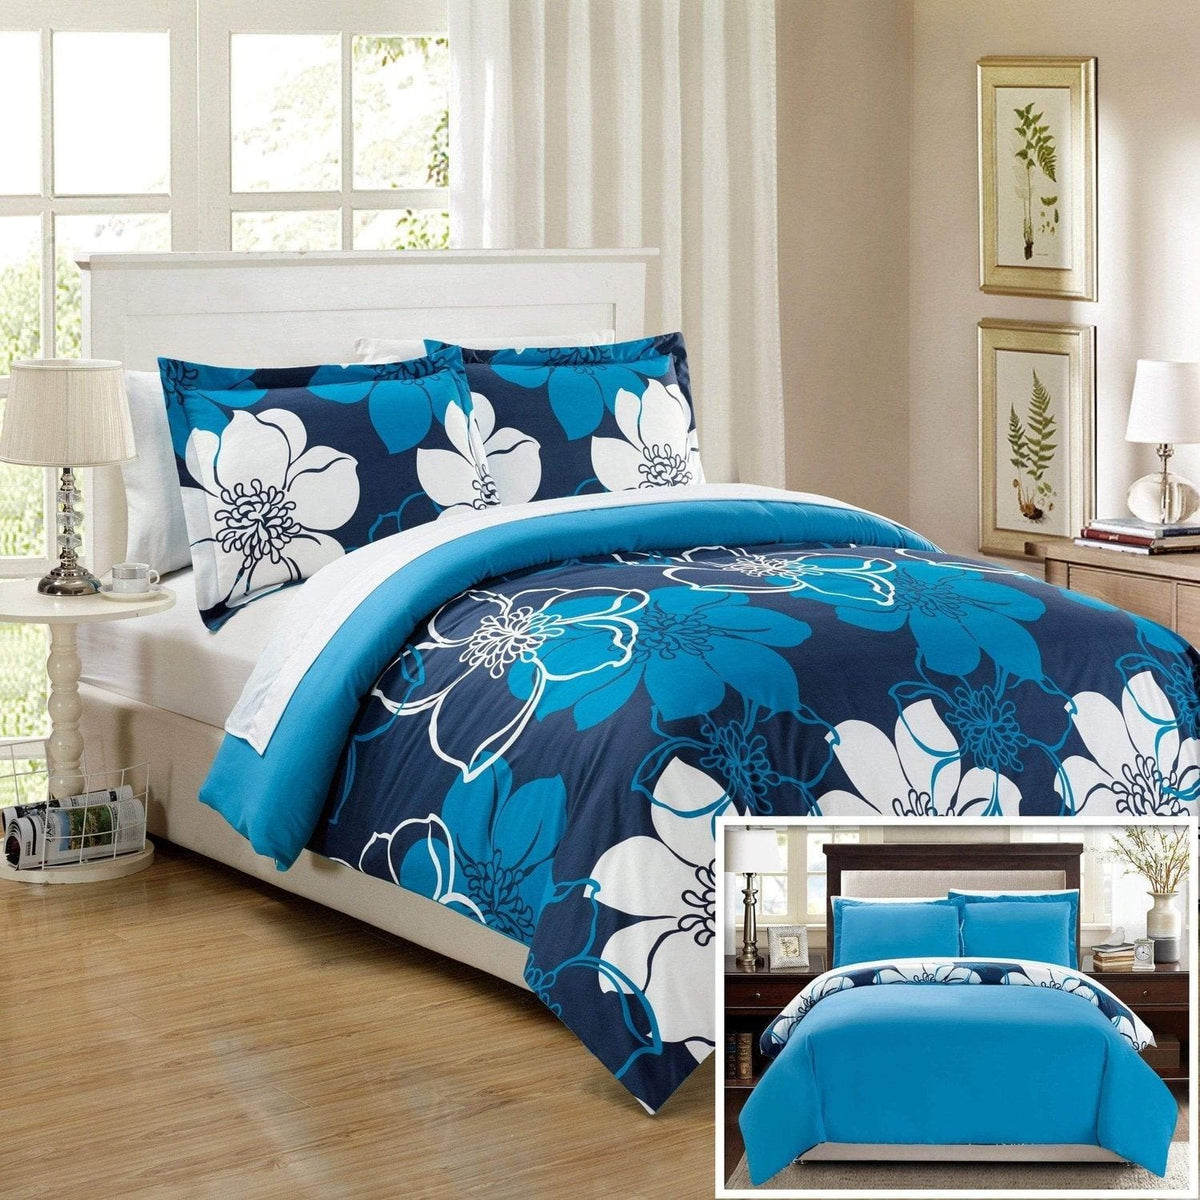 Chic Home Morning Glory 7 Piece Floral Duvet Cover Set Blue